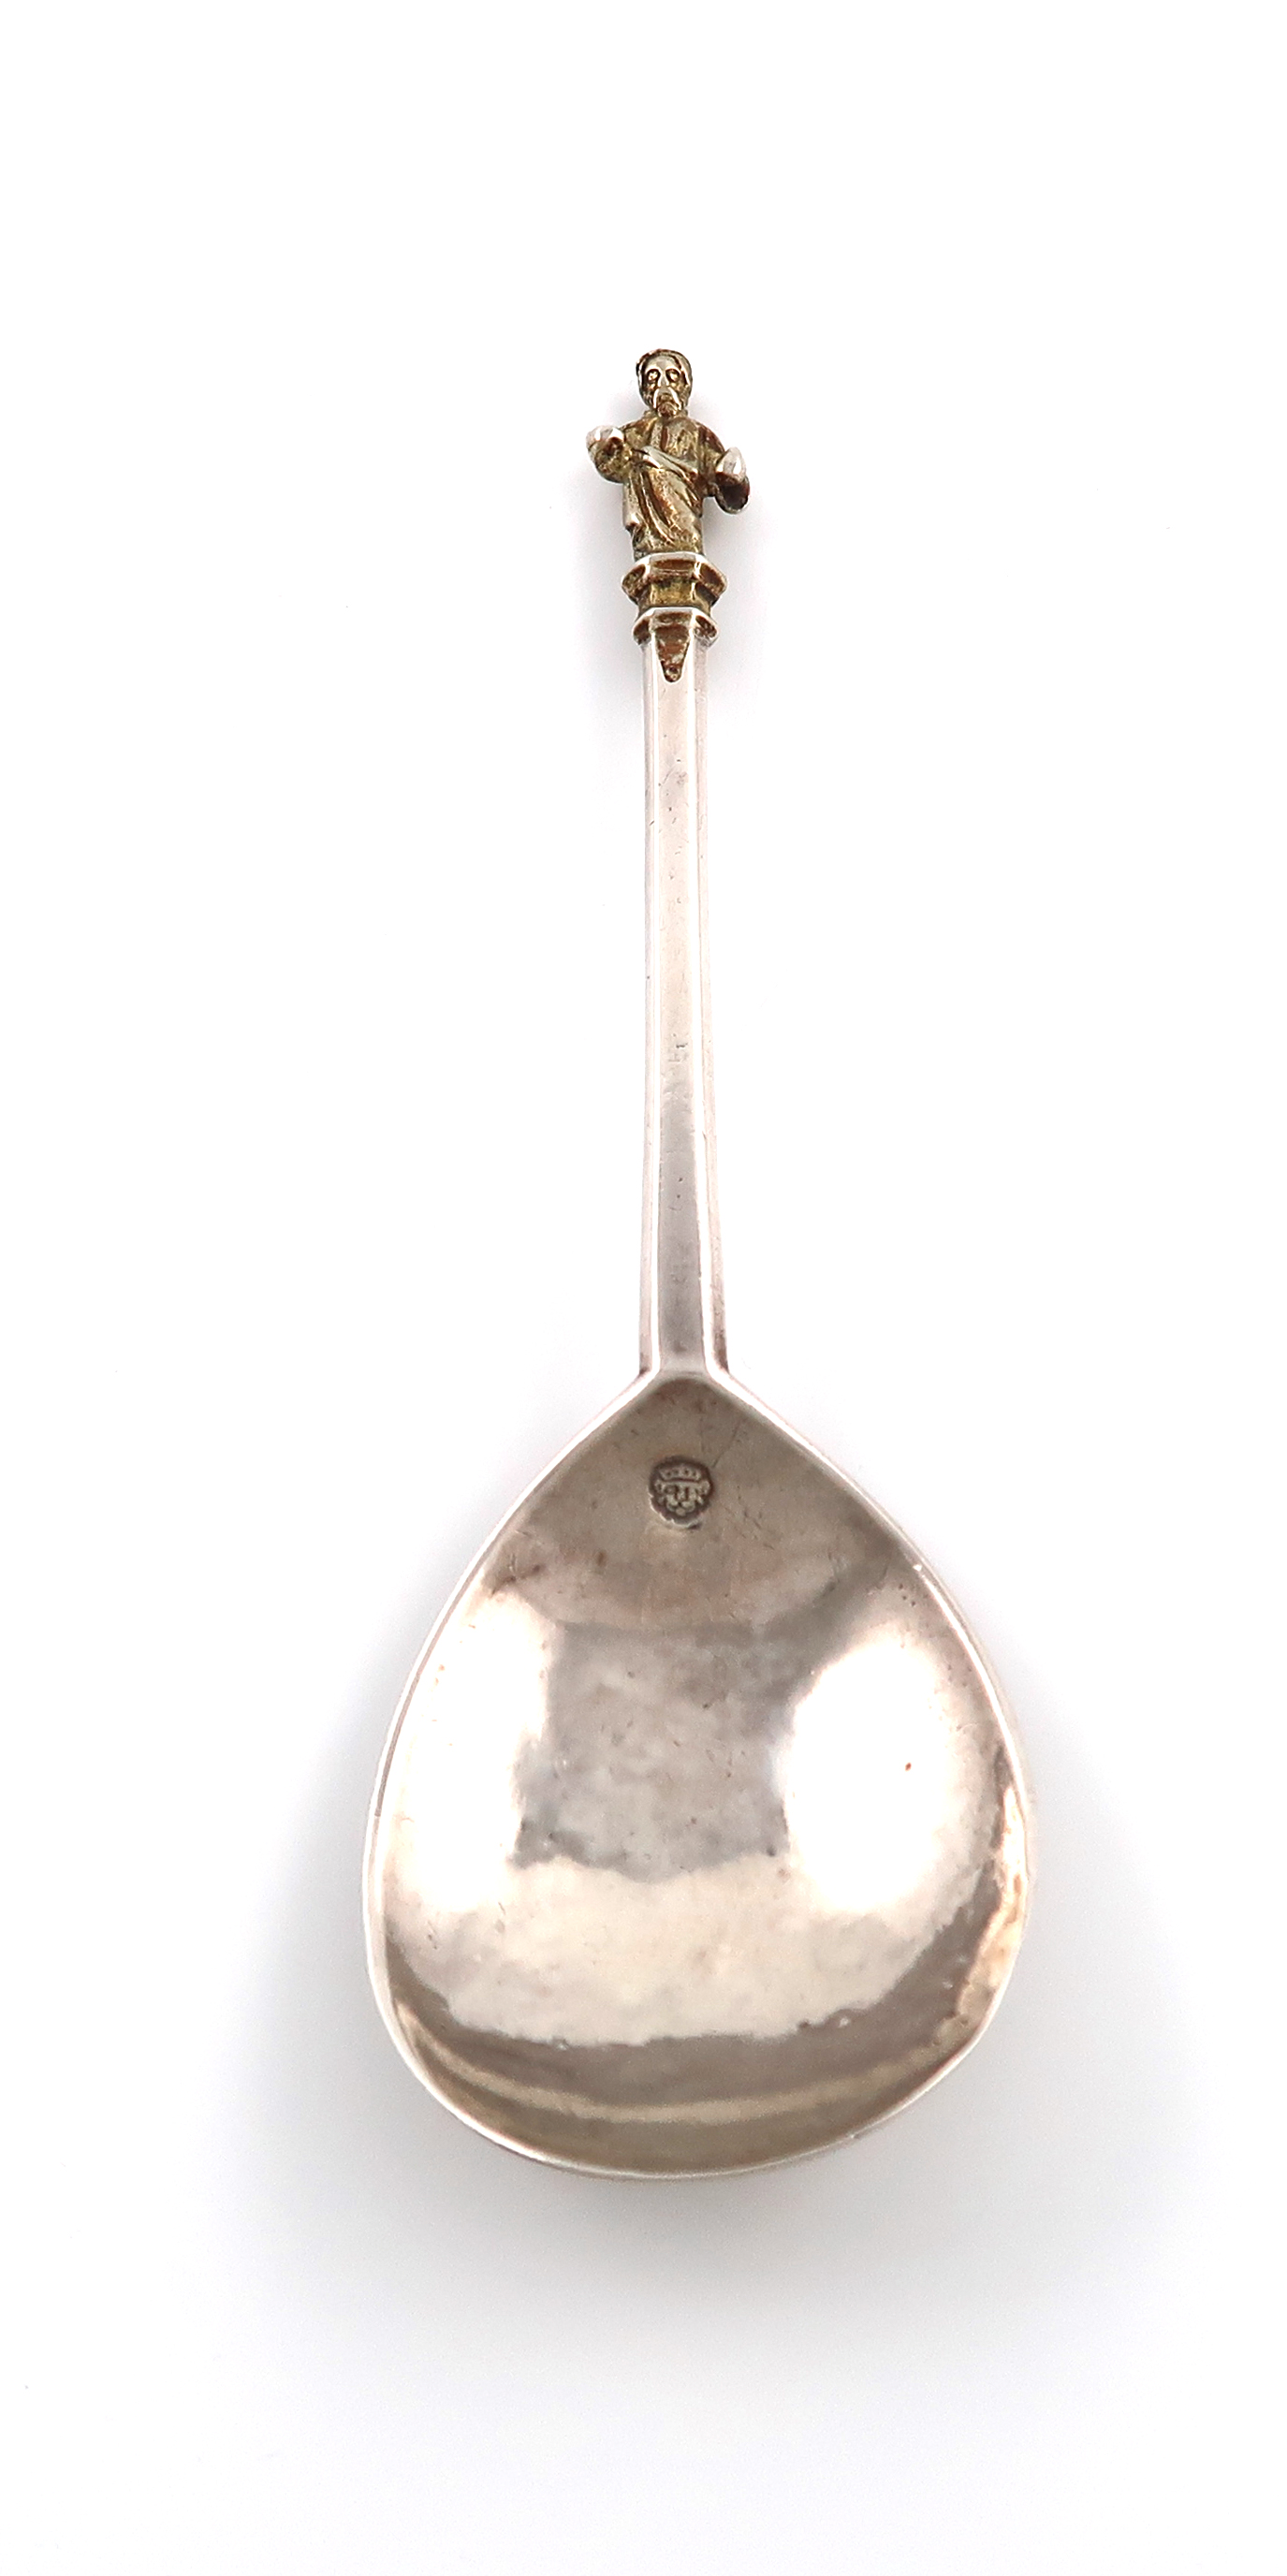 A Henry VIII silver Apostle spoon, possibly St. James the Greater,maker's mark of a device, London